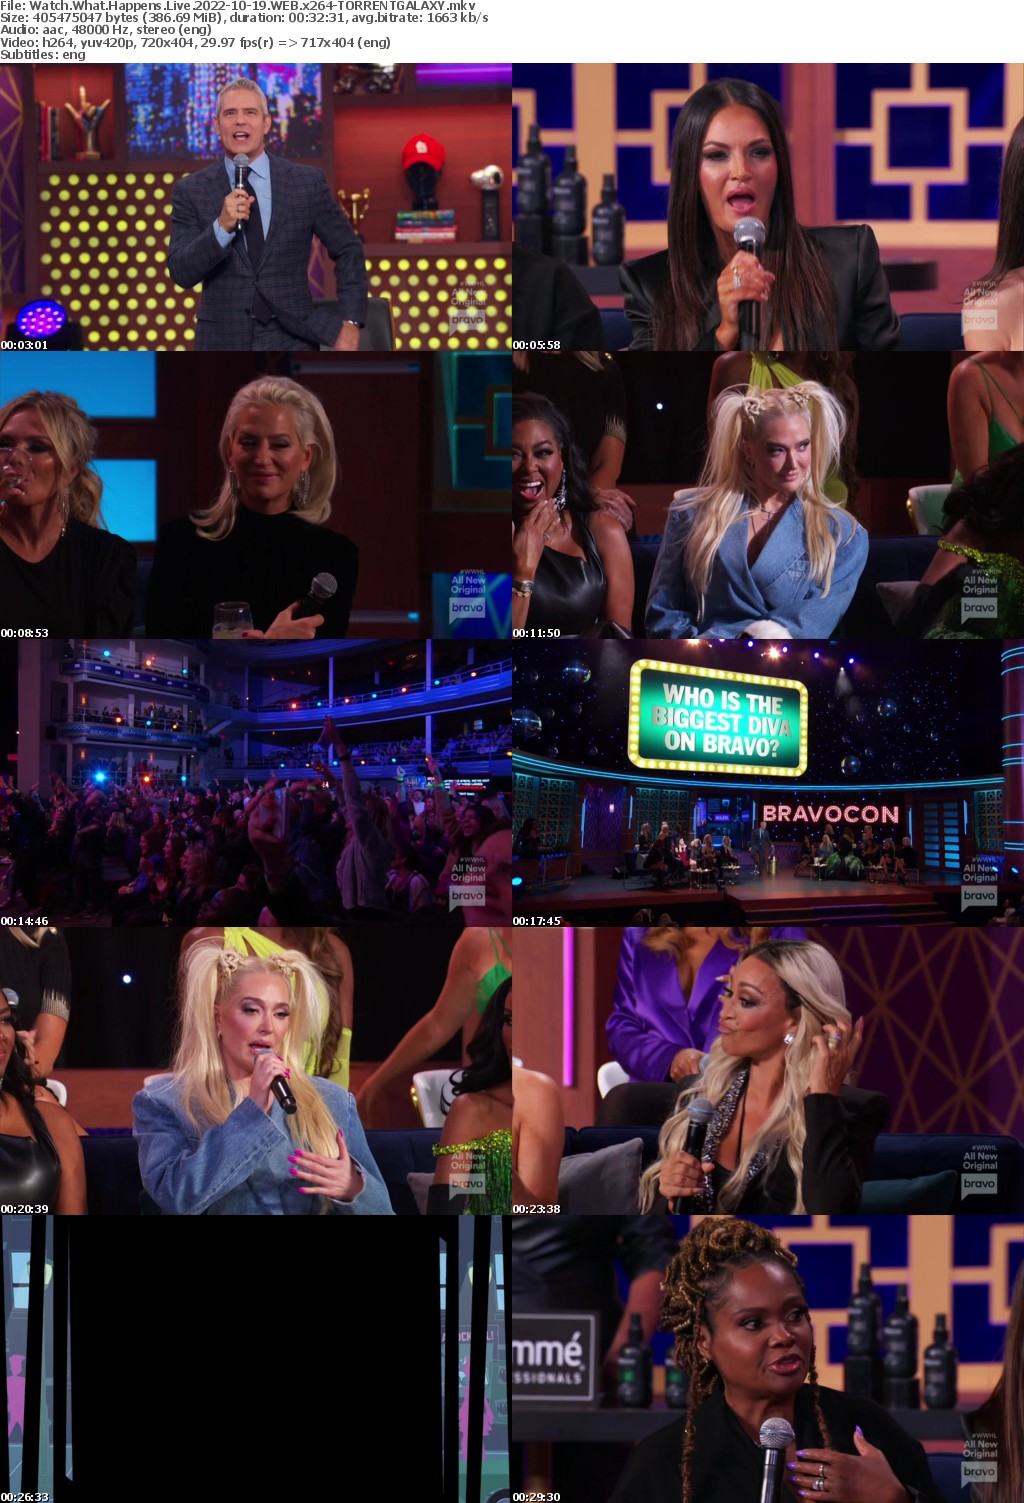 Watch What Happens Live 2022-10-19 WEB x264-GALAXY